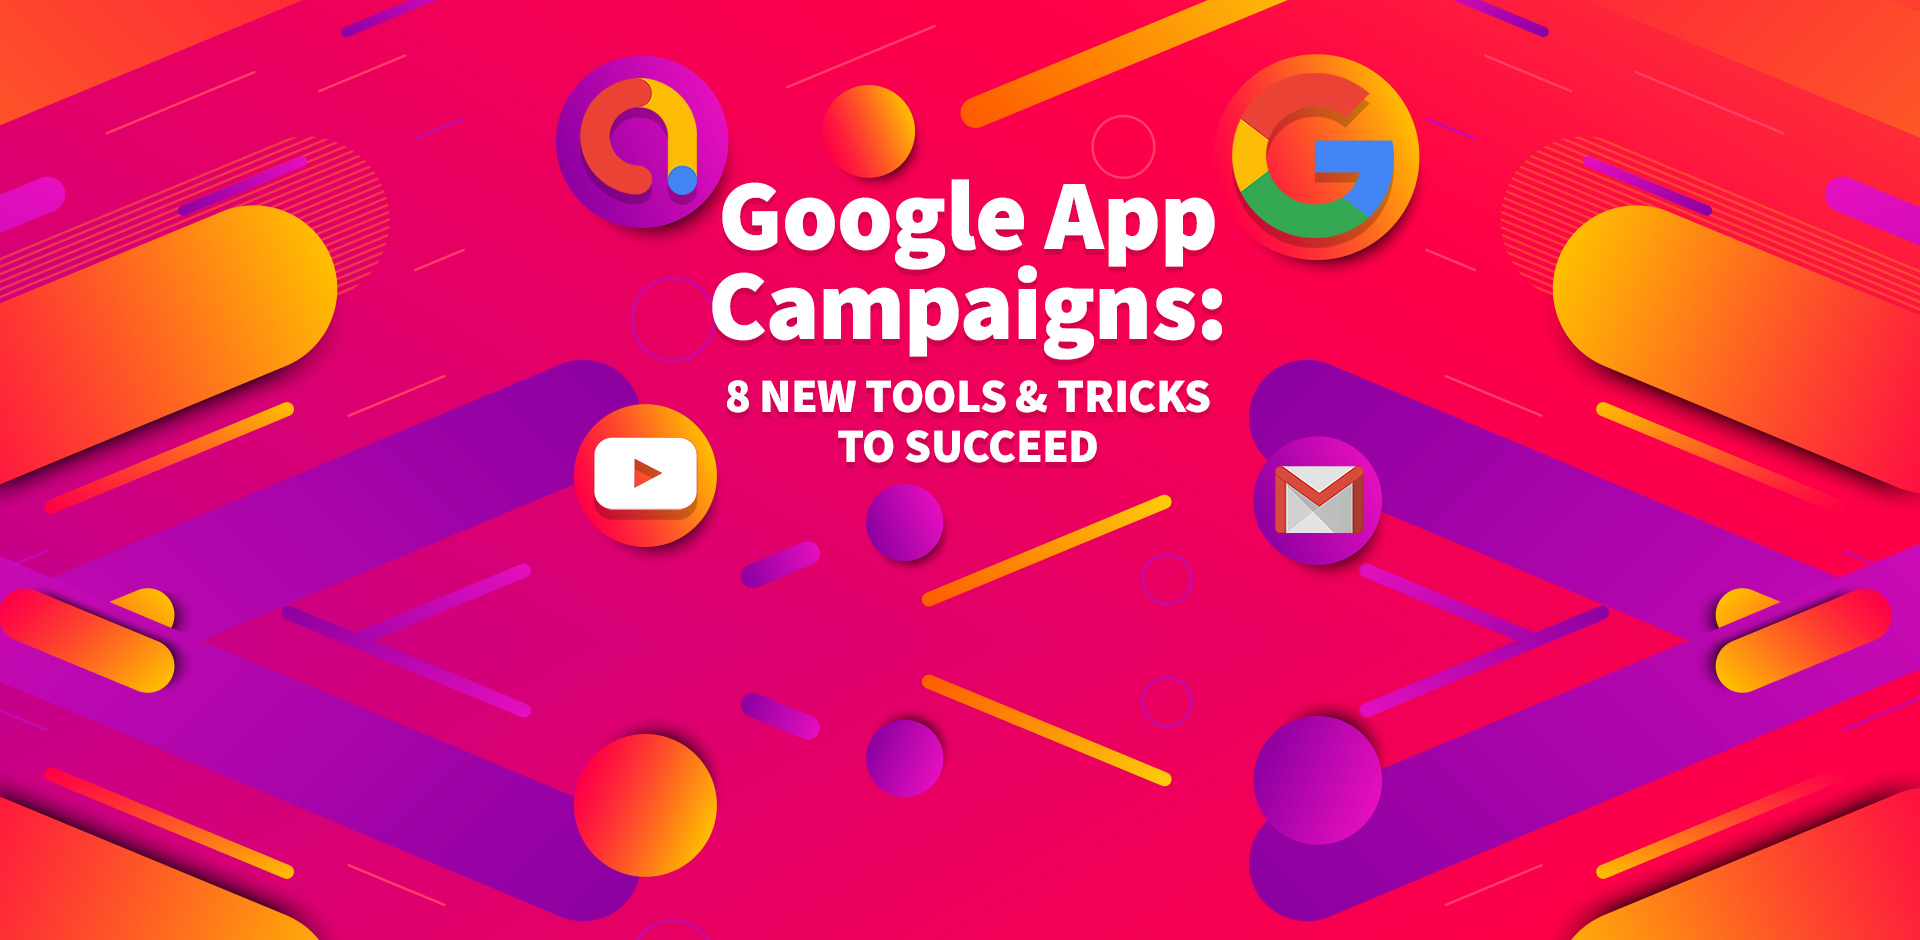 Google App Campaigns: 8 New Tools & Tricks You Need to Succeed